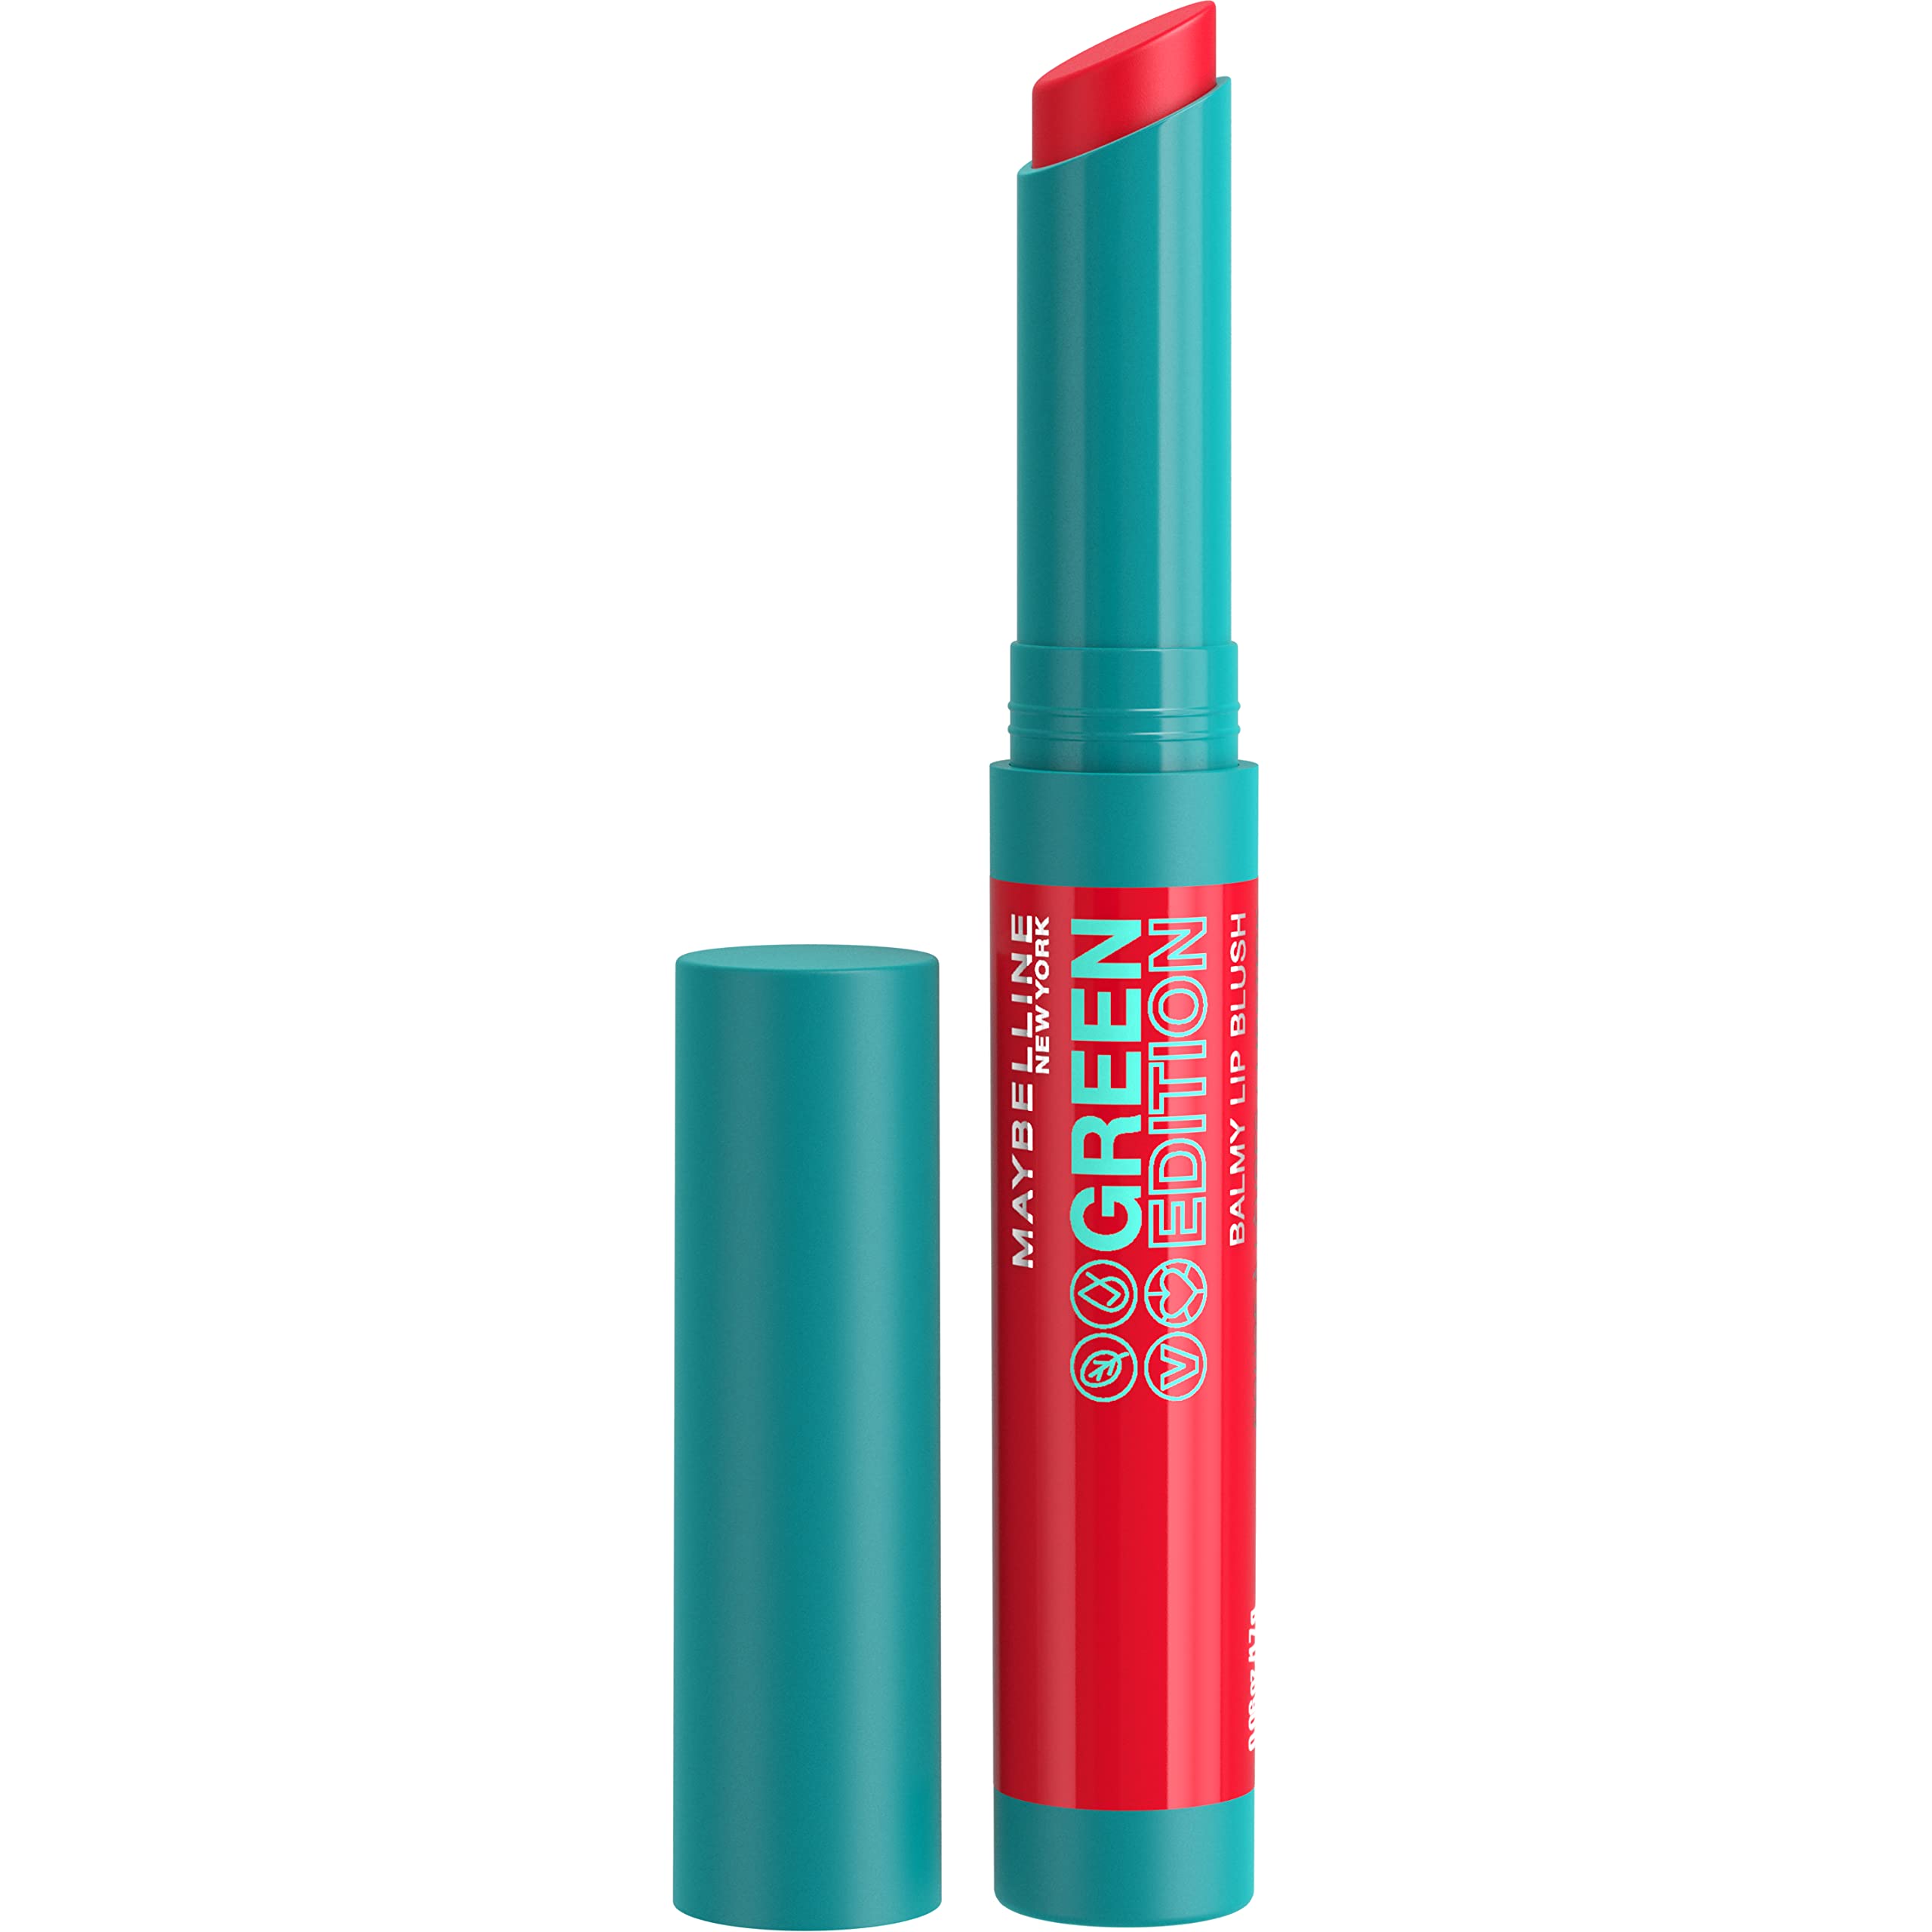 Maybelline Green Balmy Mango Count With Formulated 1 Blush Pink Edition Lip Oil Flare Red